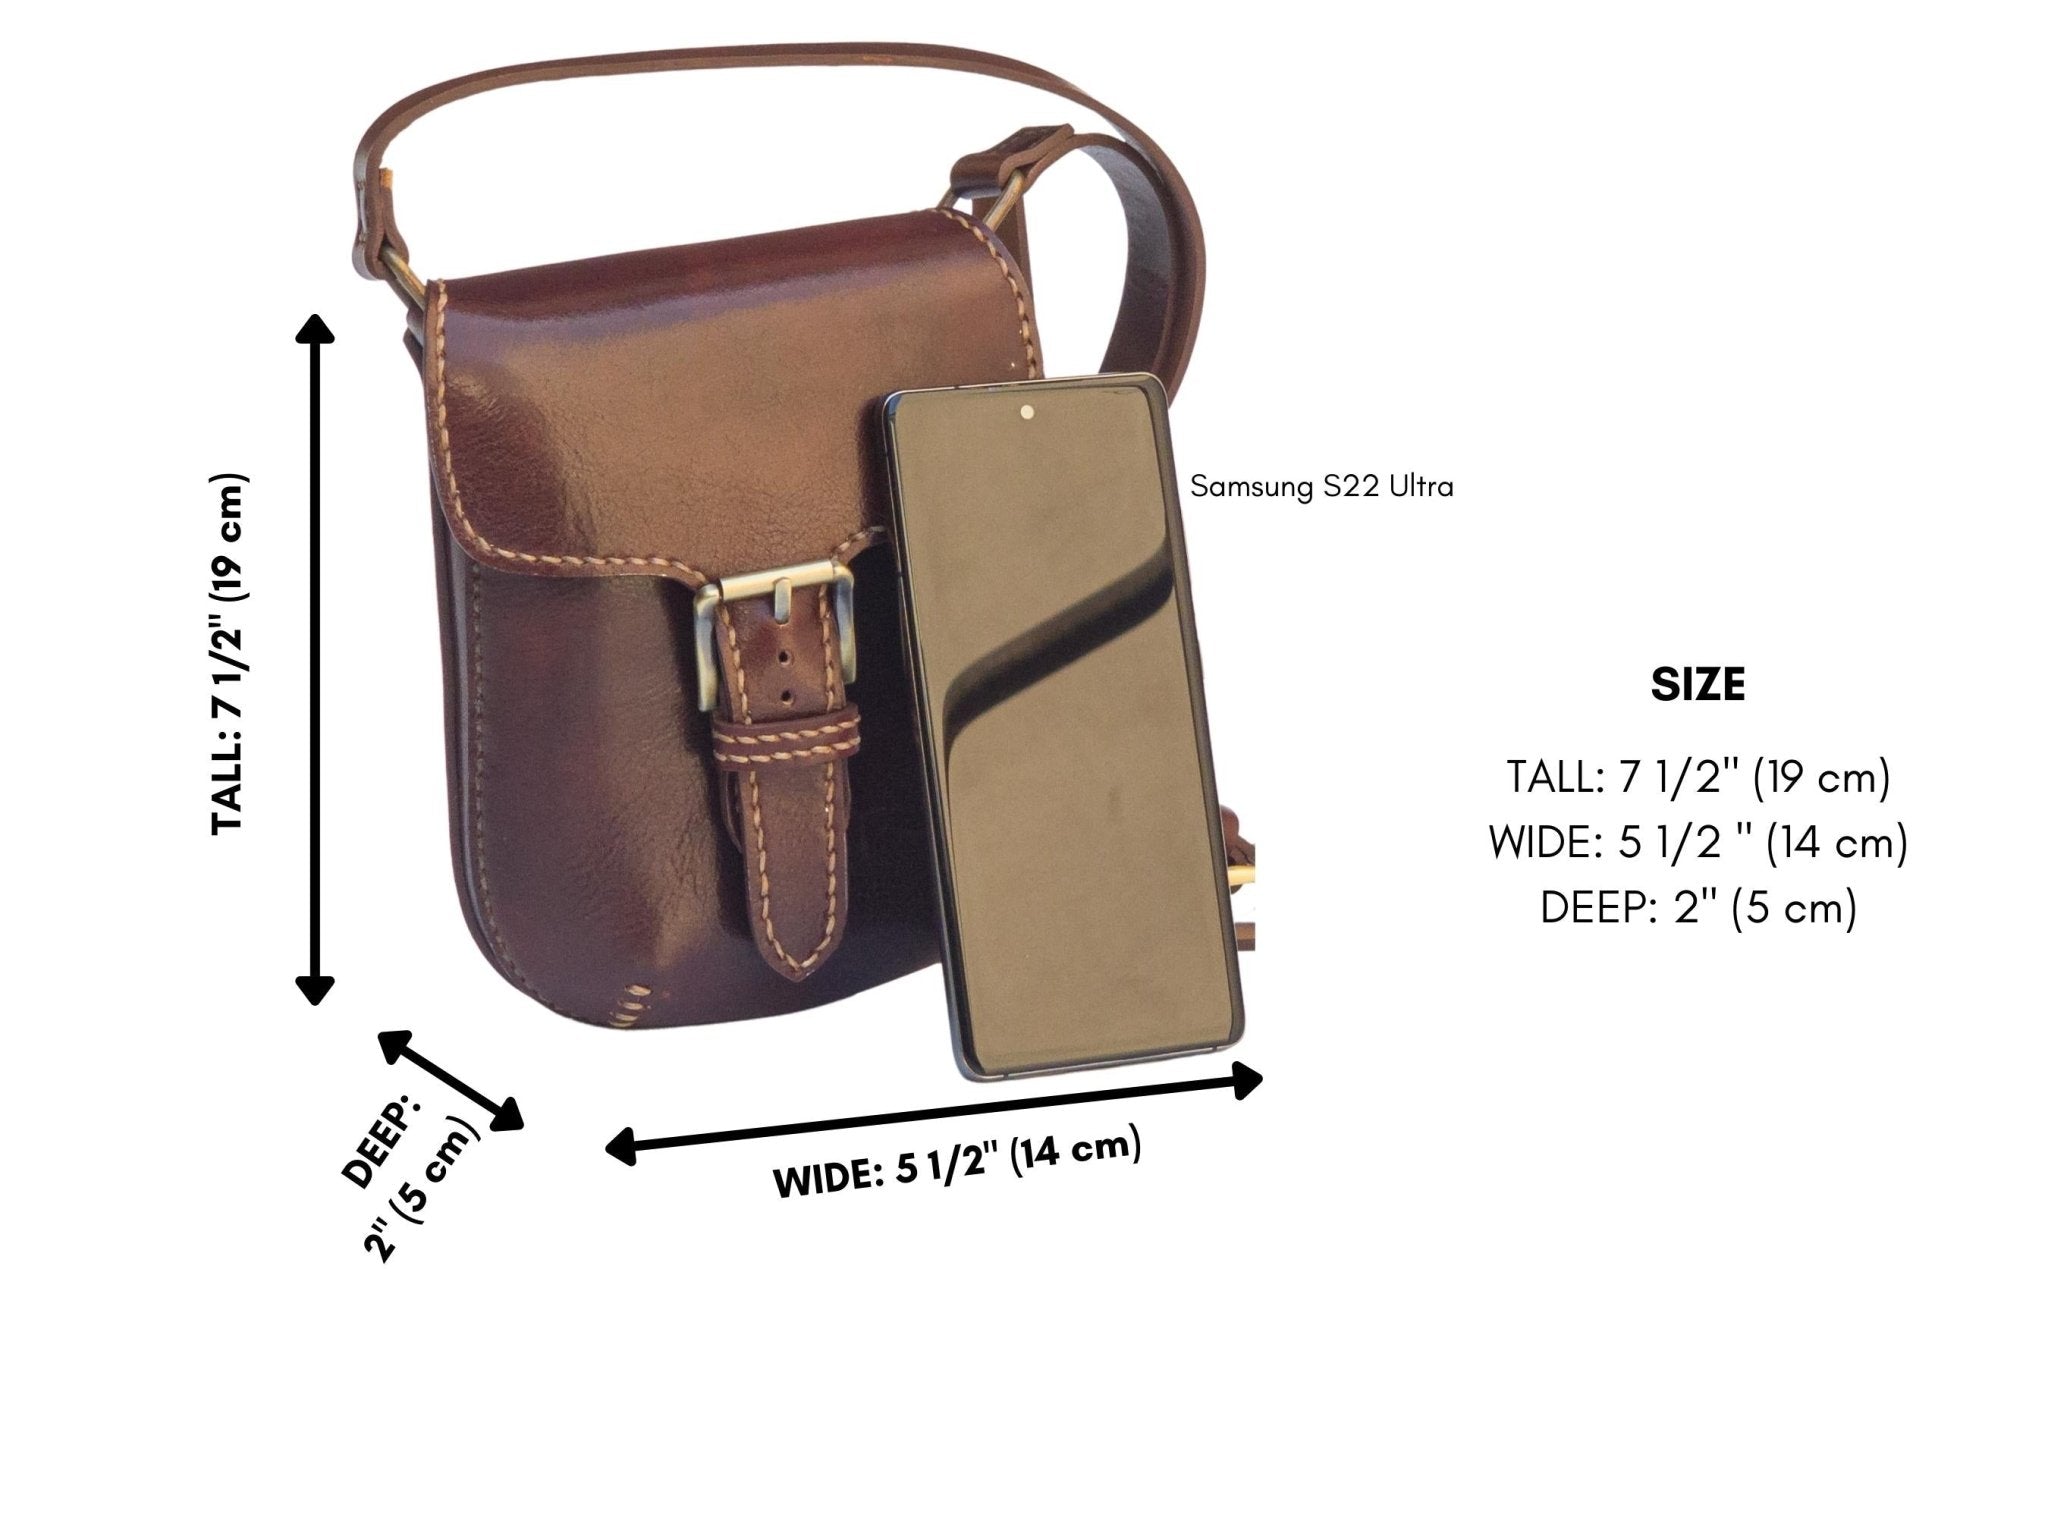 Piper Phone Bag, Crossbody Bag, PDF Pattern and Instructional Video by Vasile and Pavel - Vasile and Pavel Leather Patterns